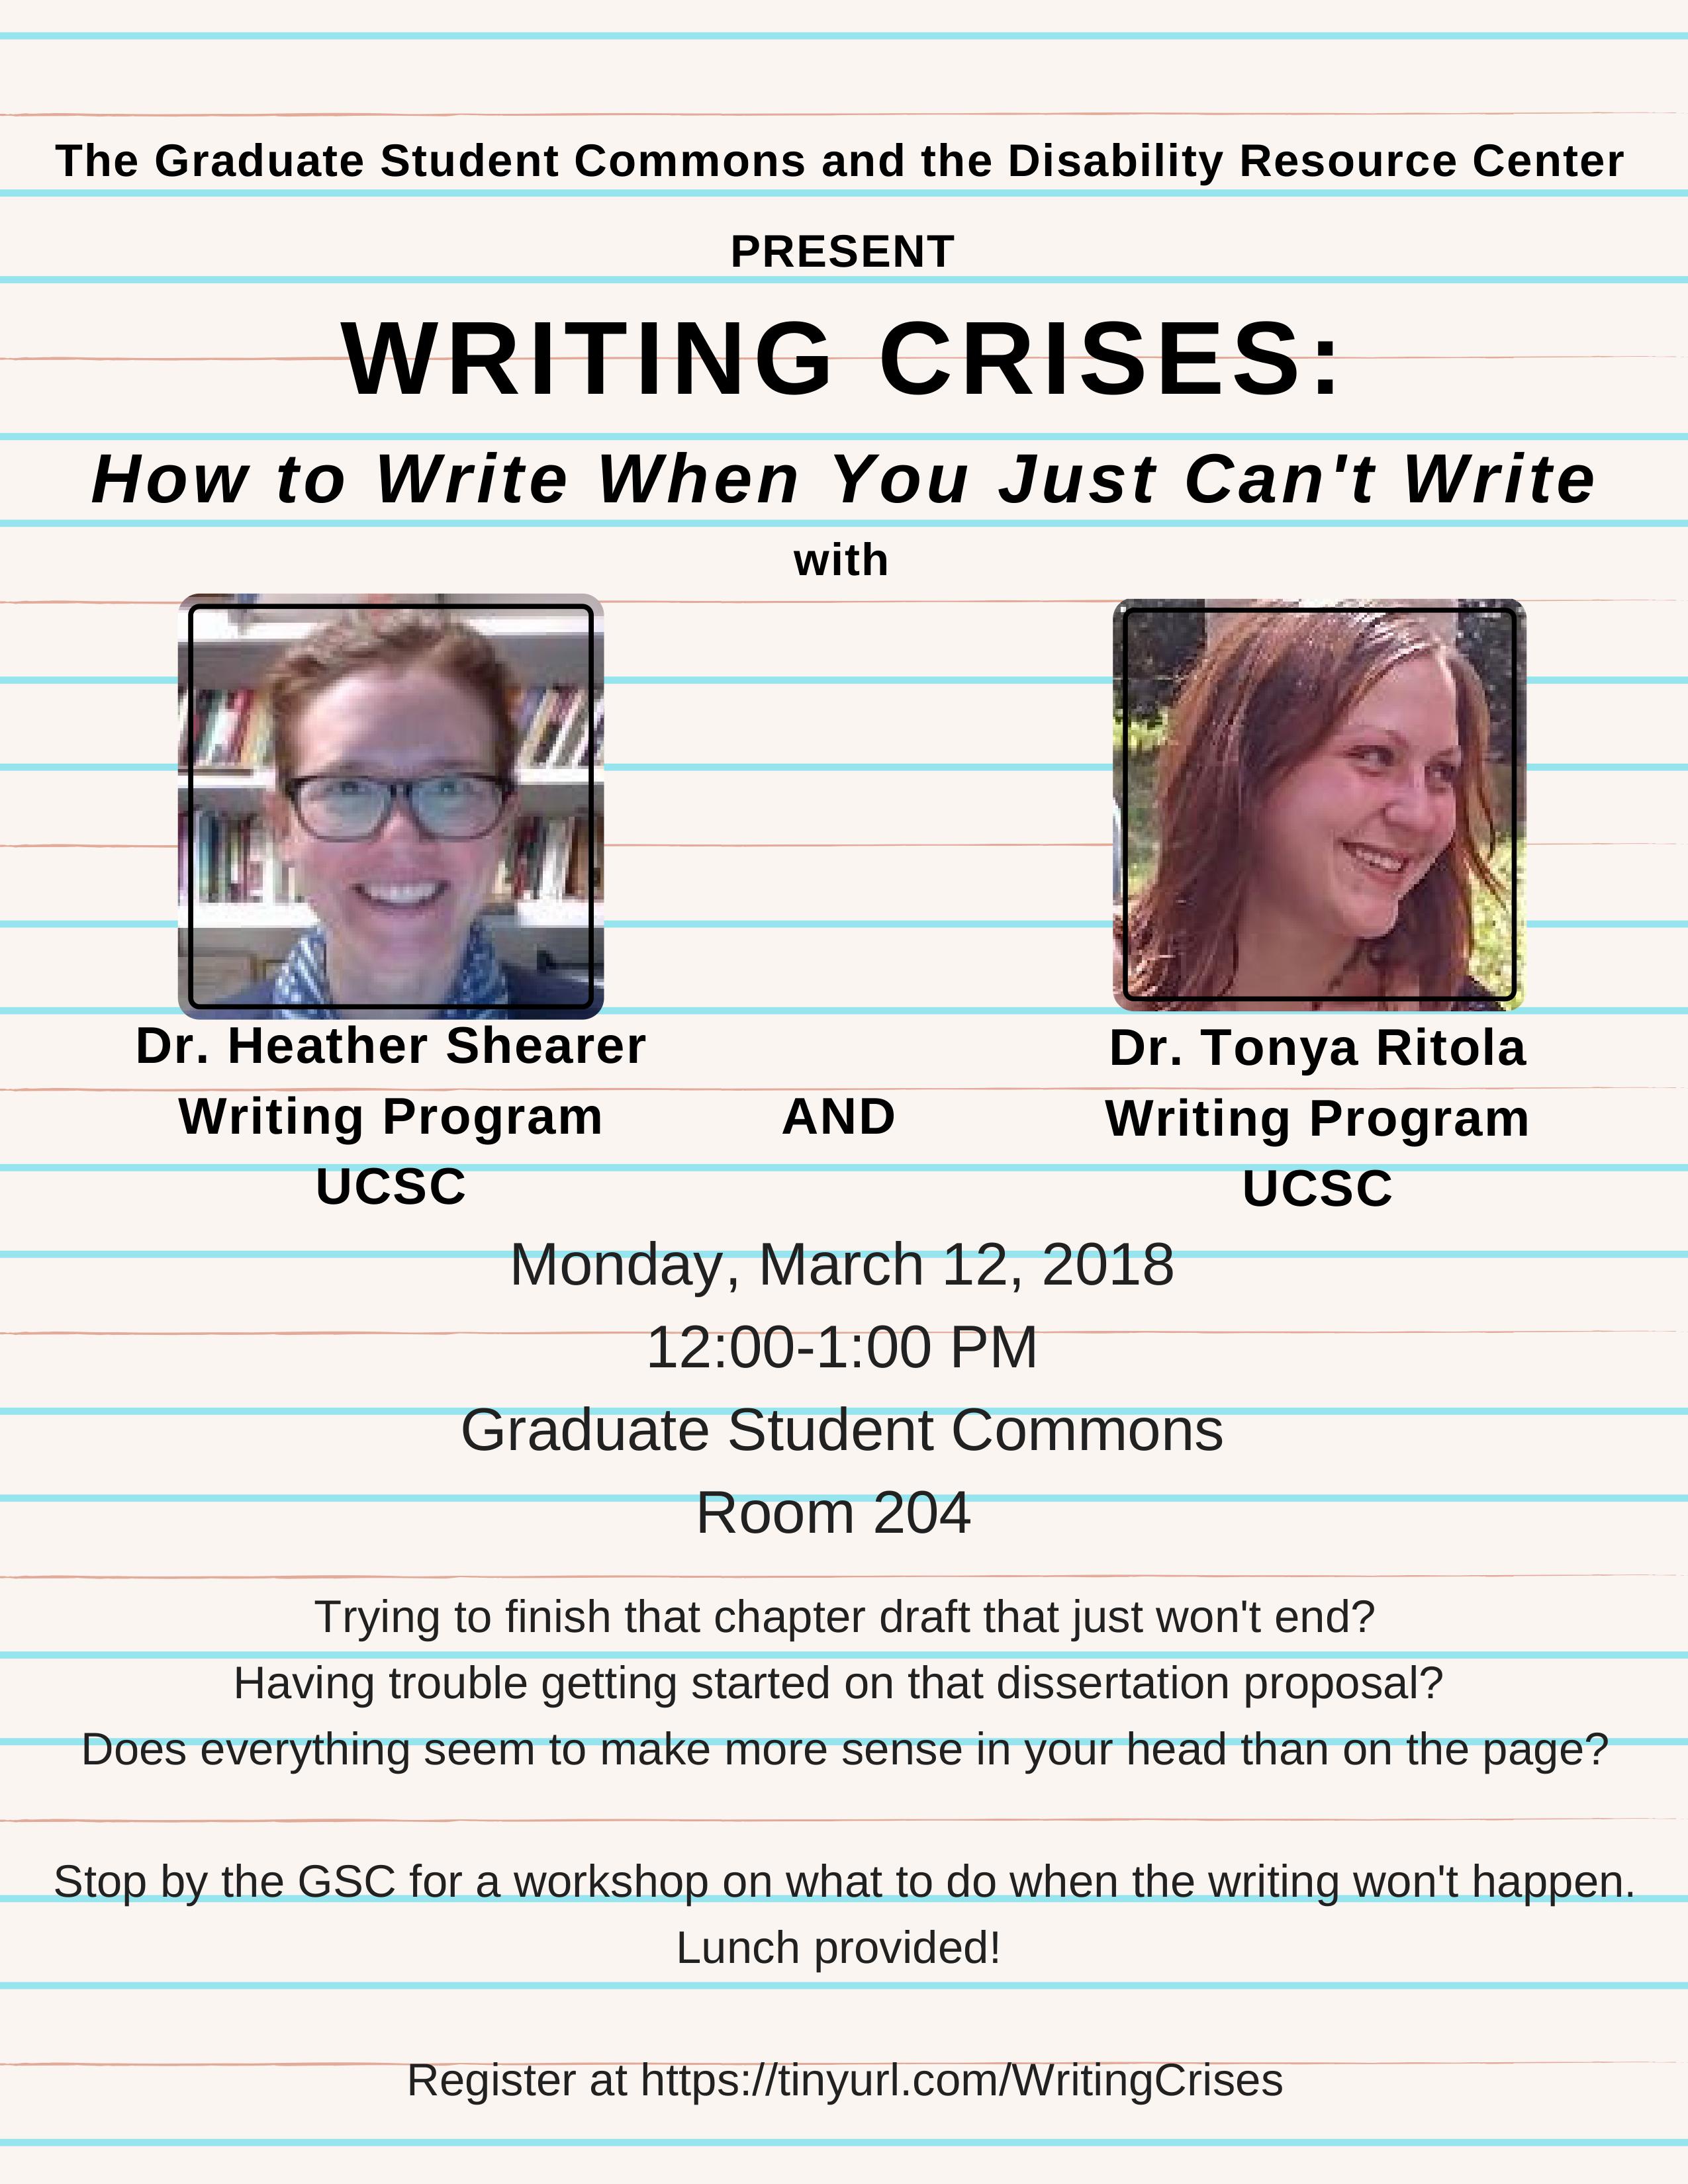 Poster for Writing Crises, showing both Heather and Tonya, is shown.